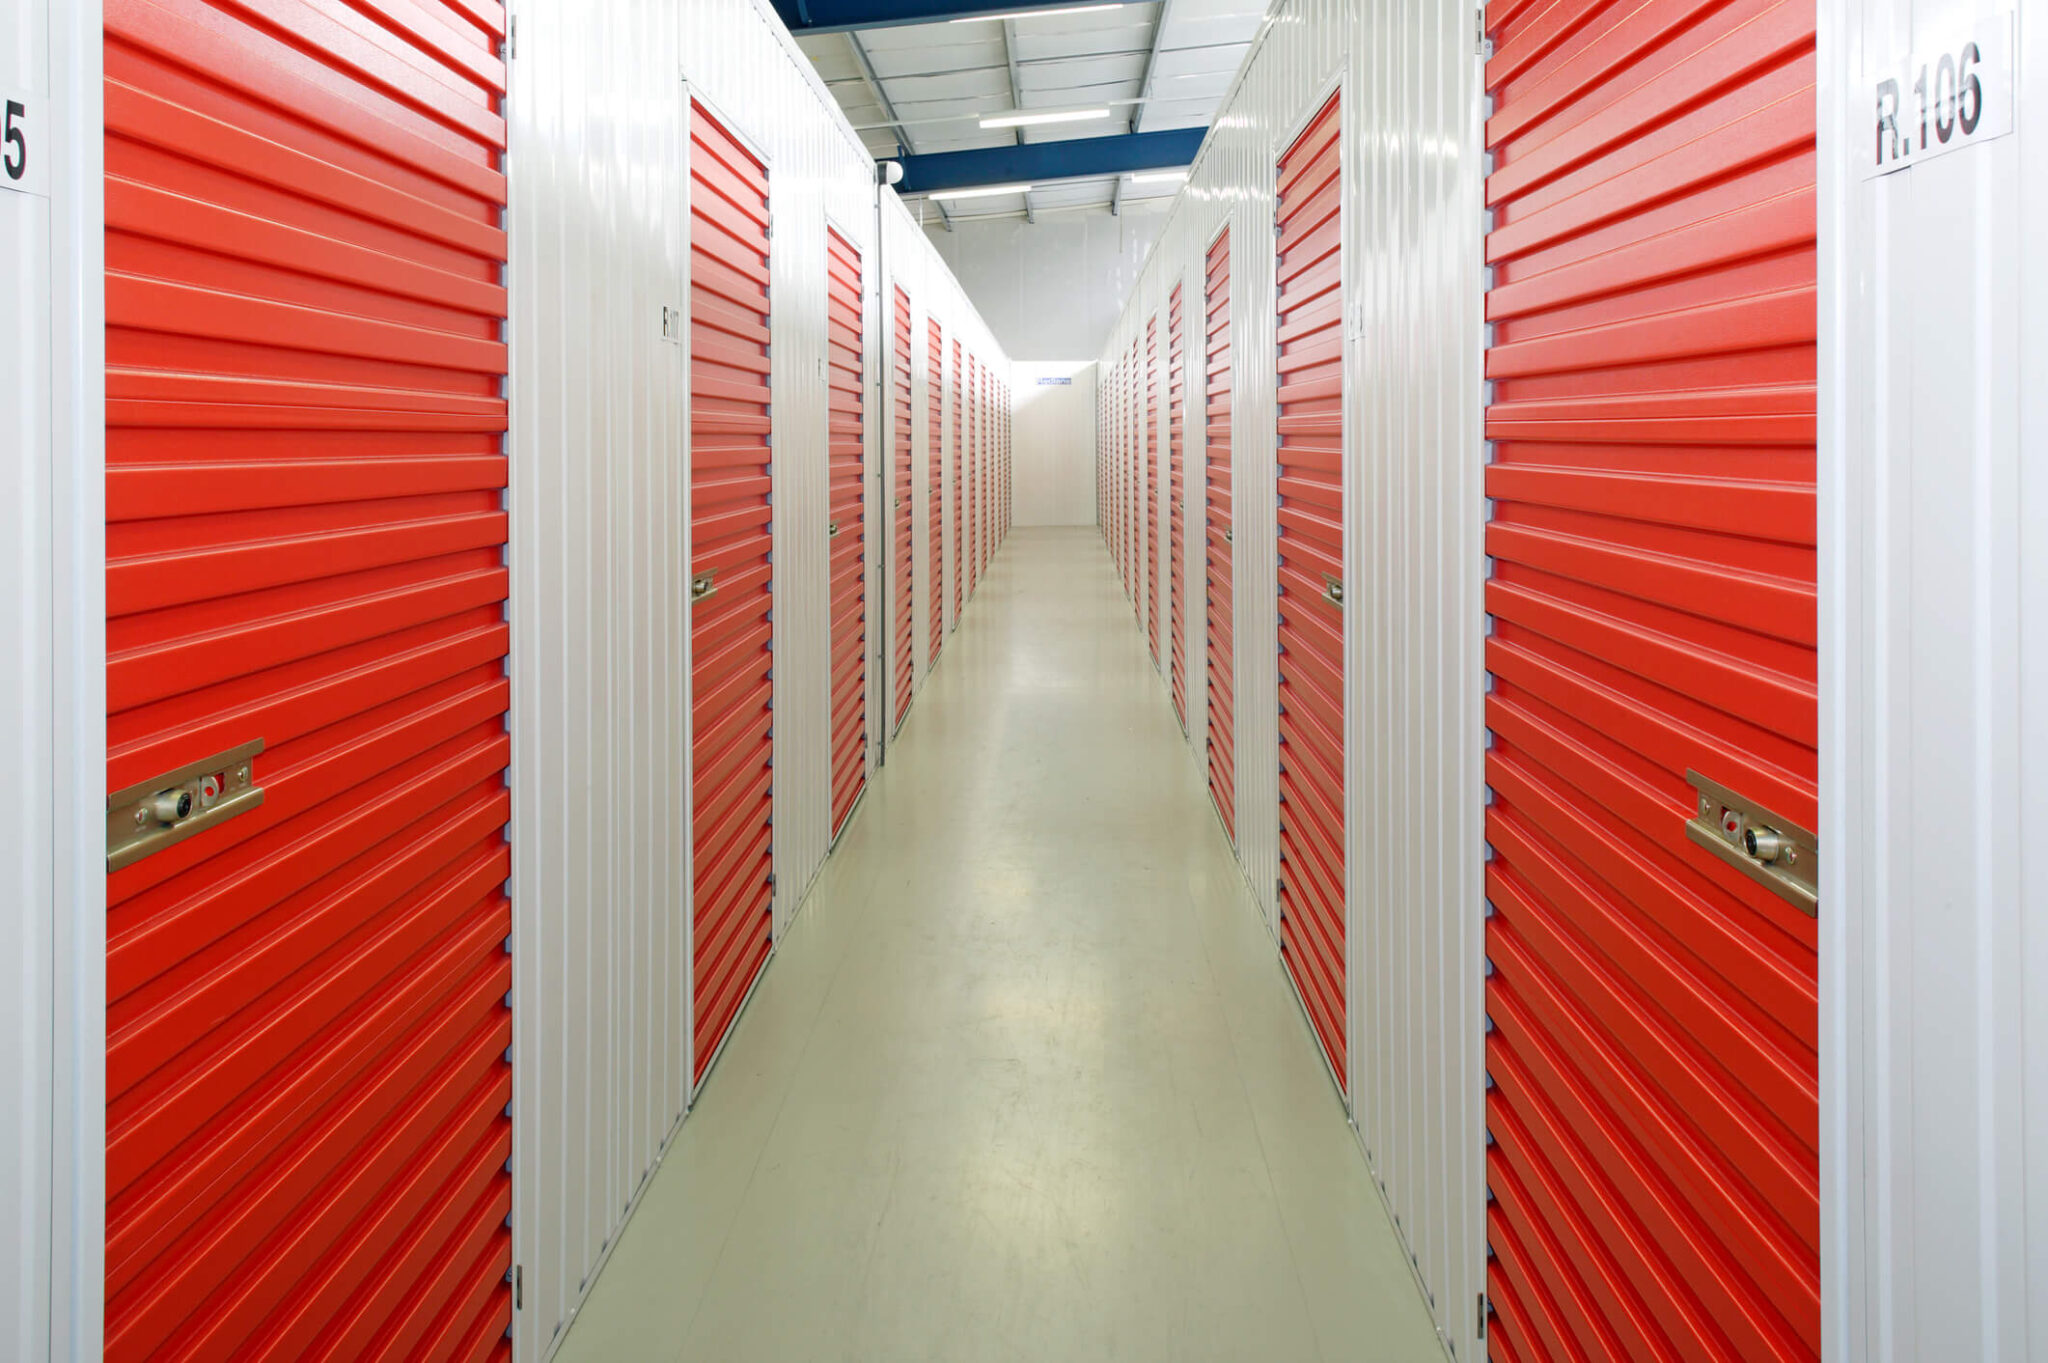 What Should Be Placed In Self Storage?